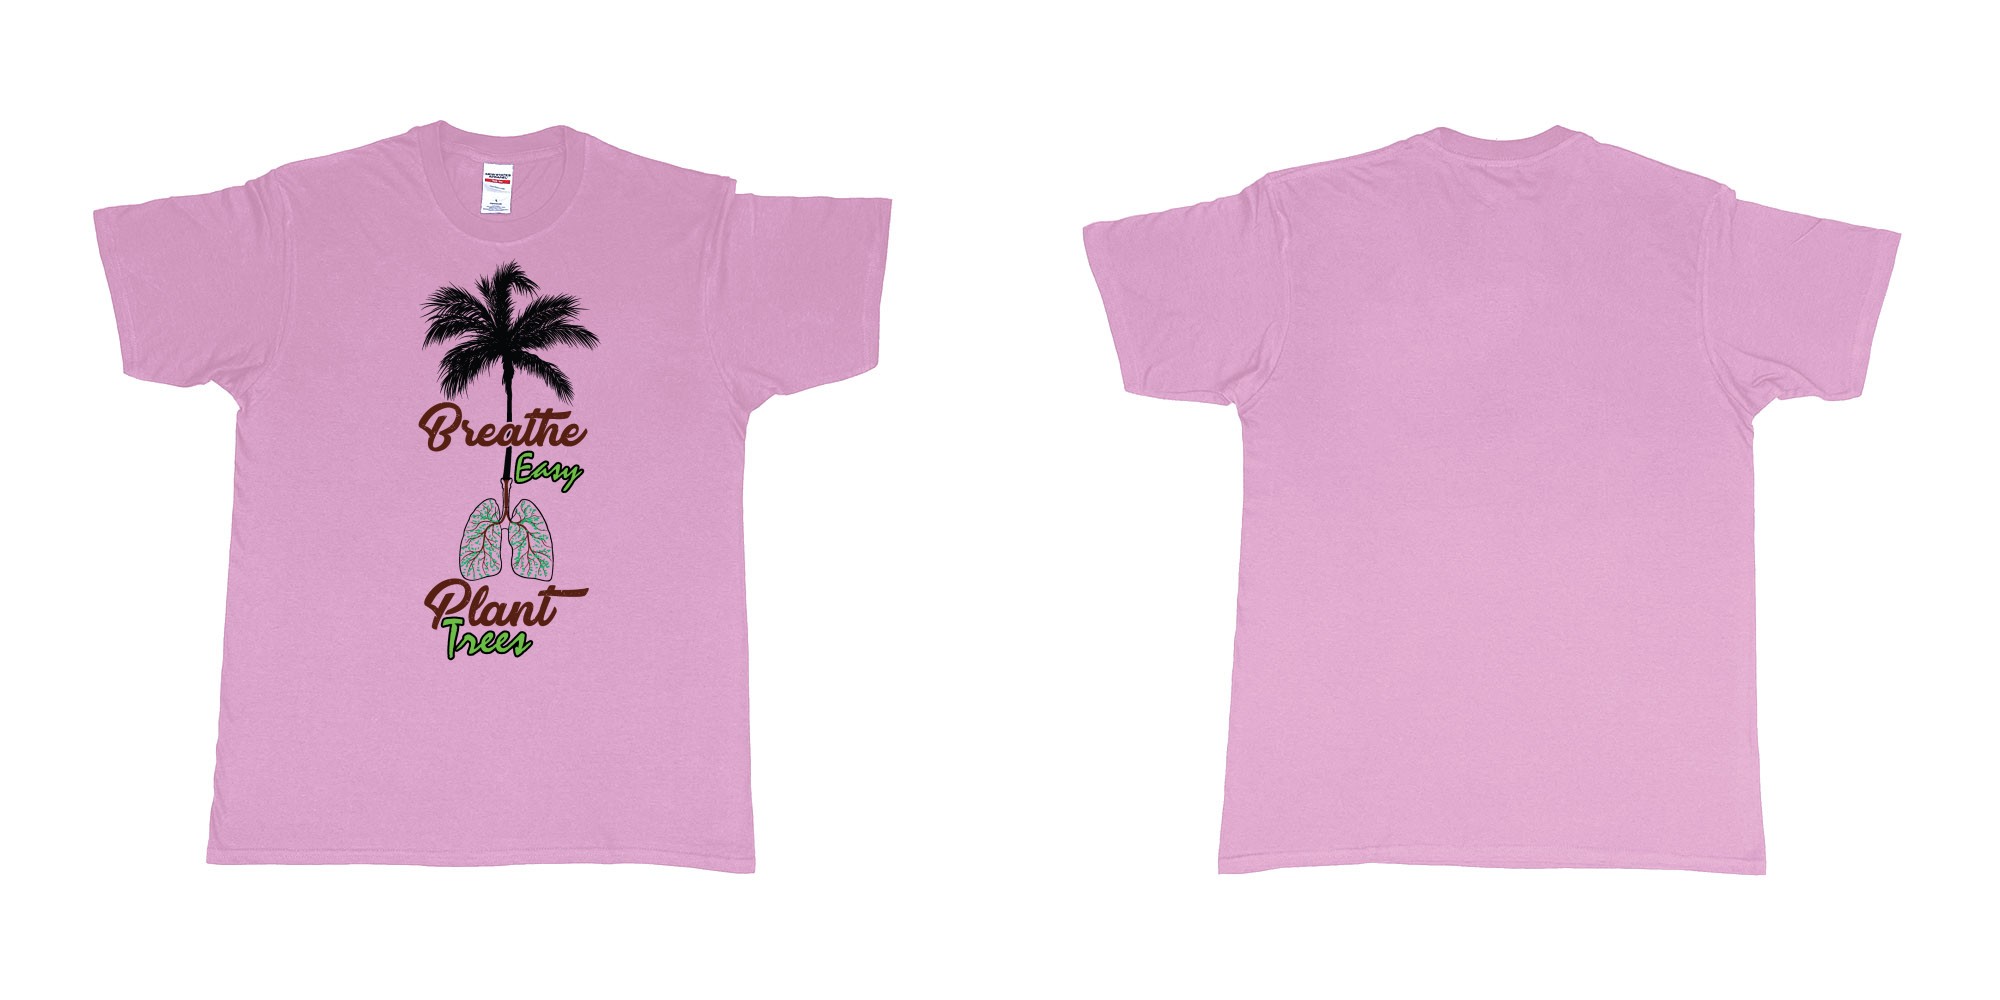 Custom tshirt design breathe easy and plant a tree for better air for everyone in fabric color light-pink choice your own text made in Bali by The Pirate Way